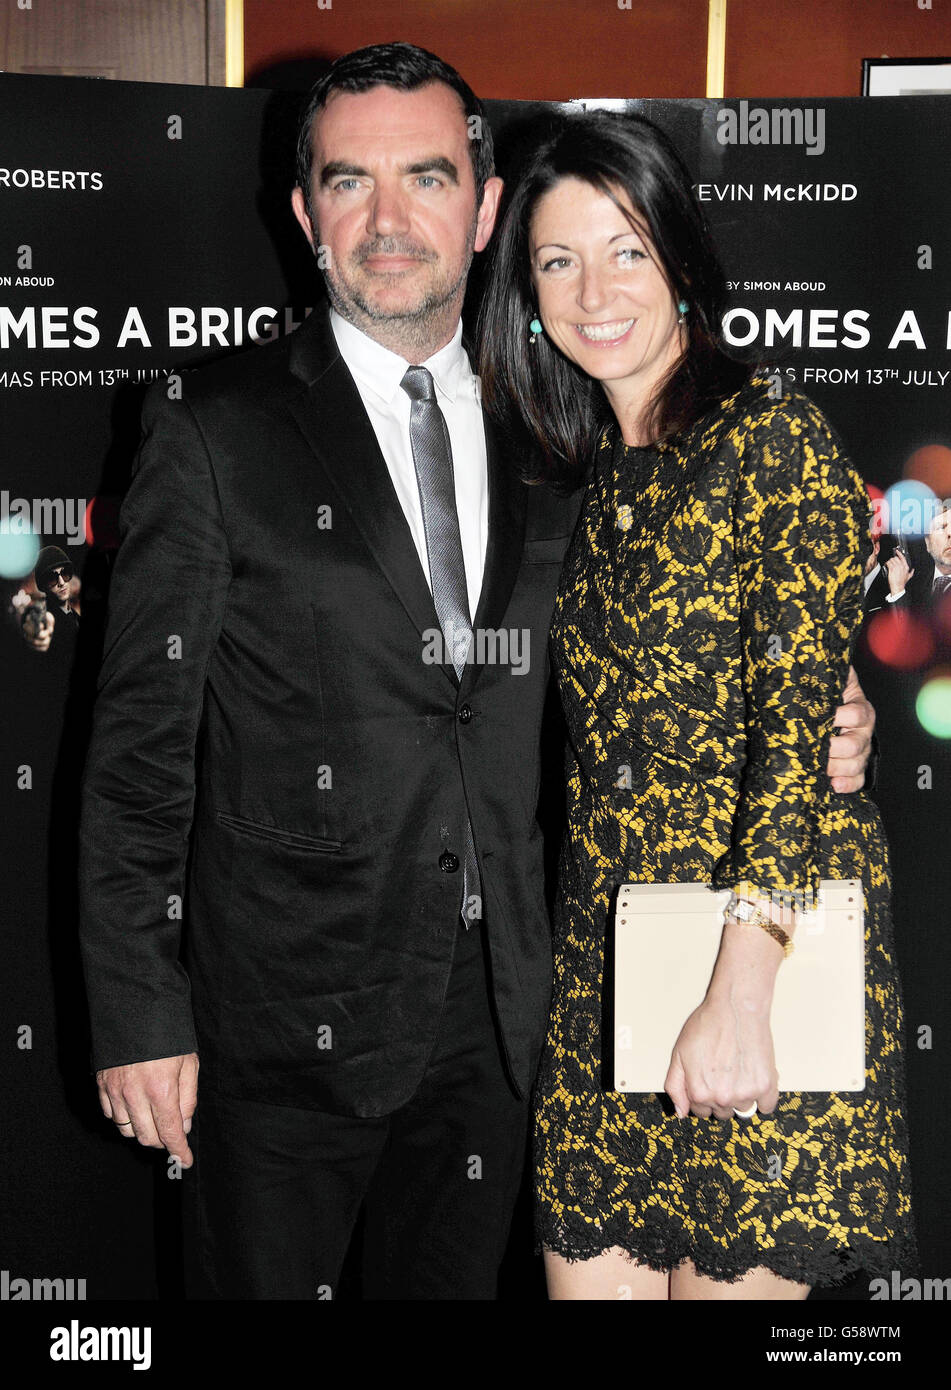 Mary McCartney and husband Simon Aboud (left) arriving at the Comes A Bright Day premiere at the Curzon Mayfair Cinema, London. Stock Photo